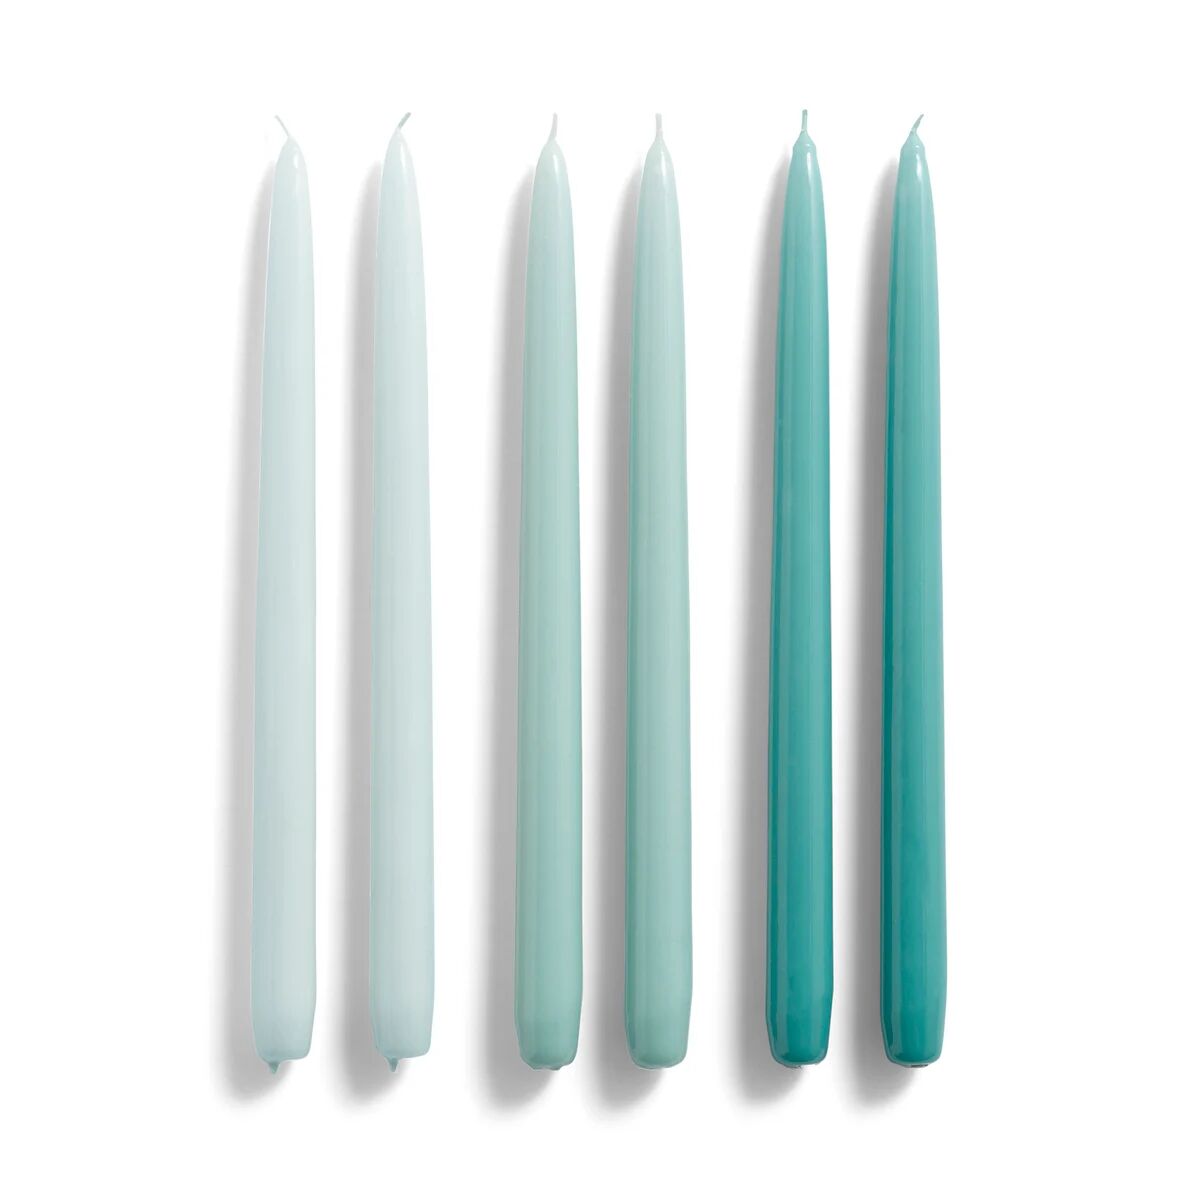 HAY Candle Conical lys 6-stk. Ice blue-artic blue-teal